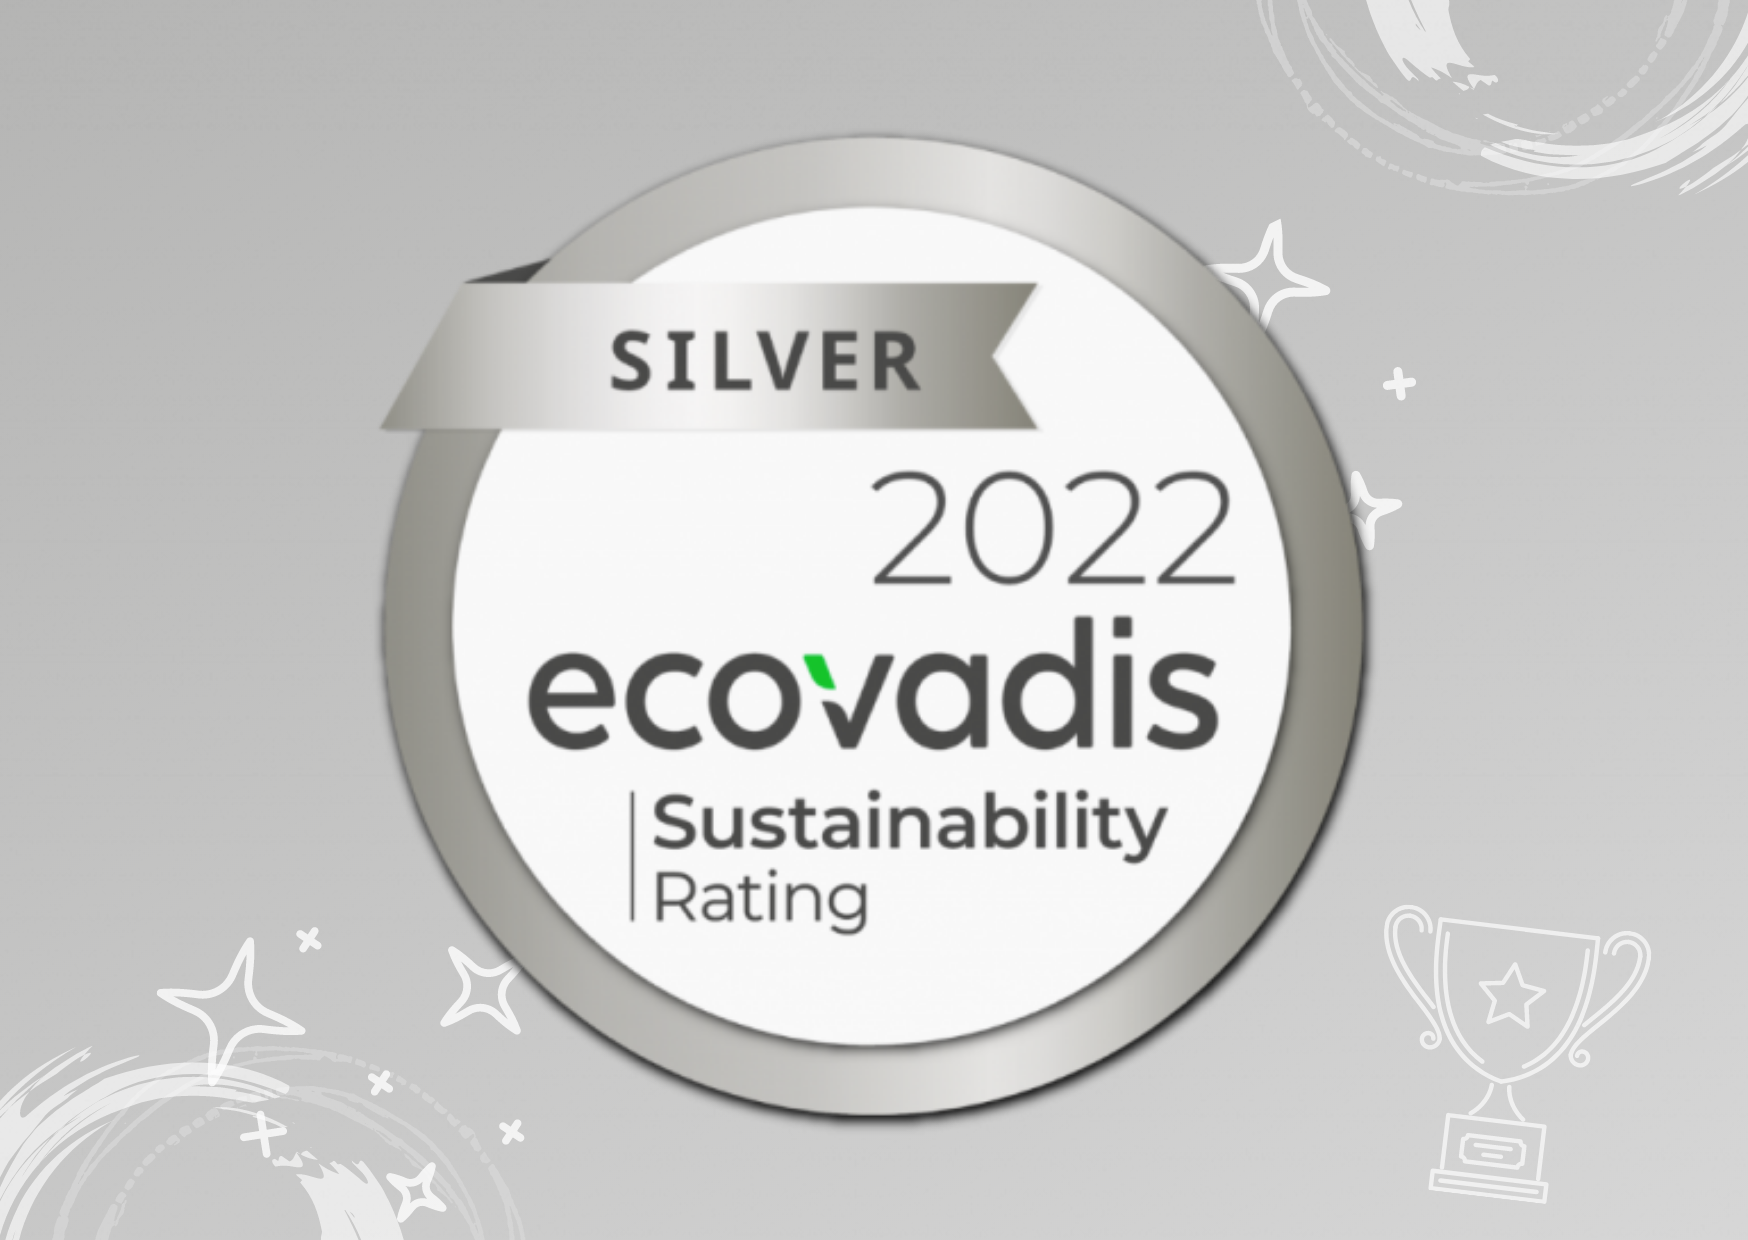 Ecovadis Silver for our sustainability efforts